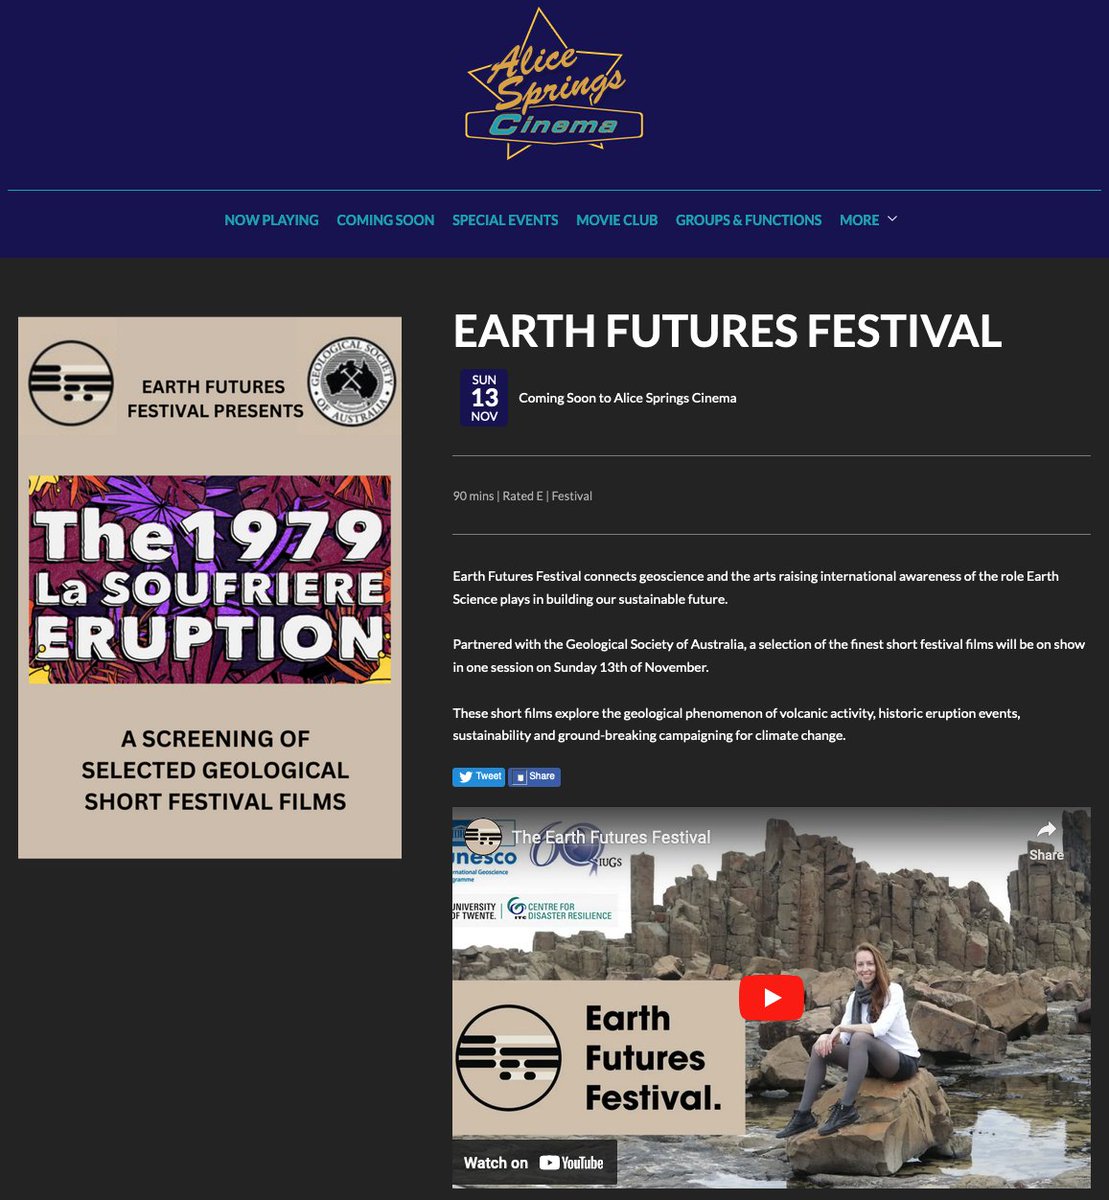 The @EarthFutureFest has made it to the centre of #Australia! A community screening event will take place at Alice Springs Cinema, Alice Springs on 13 November 2022 where they will be showing a selection of the finalist and official selection #EFF22 films alicespringscinema.com.au/movie/earth-fu…